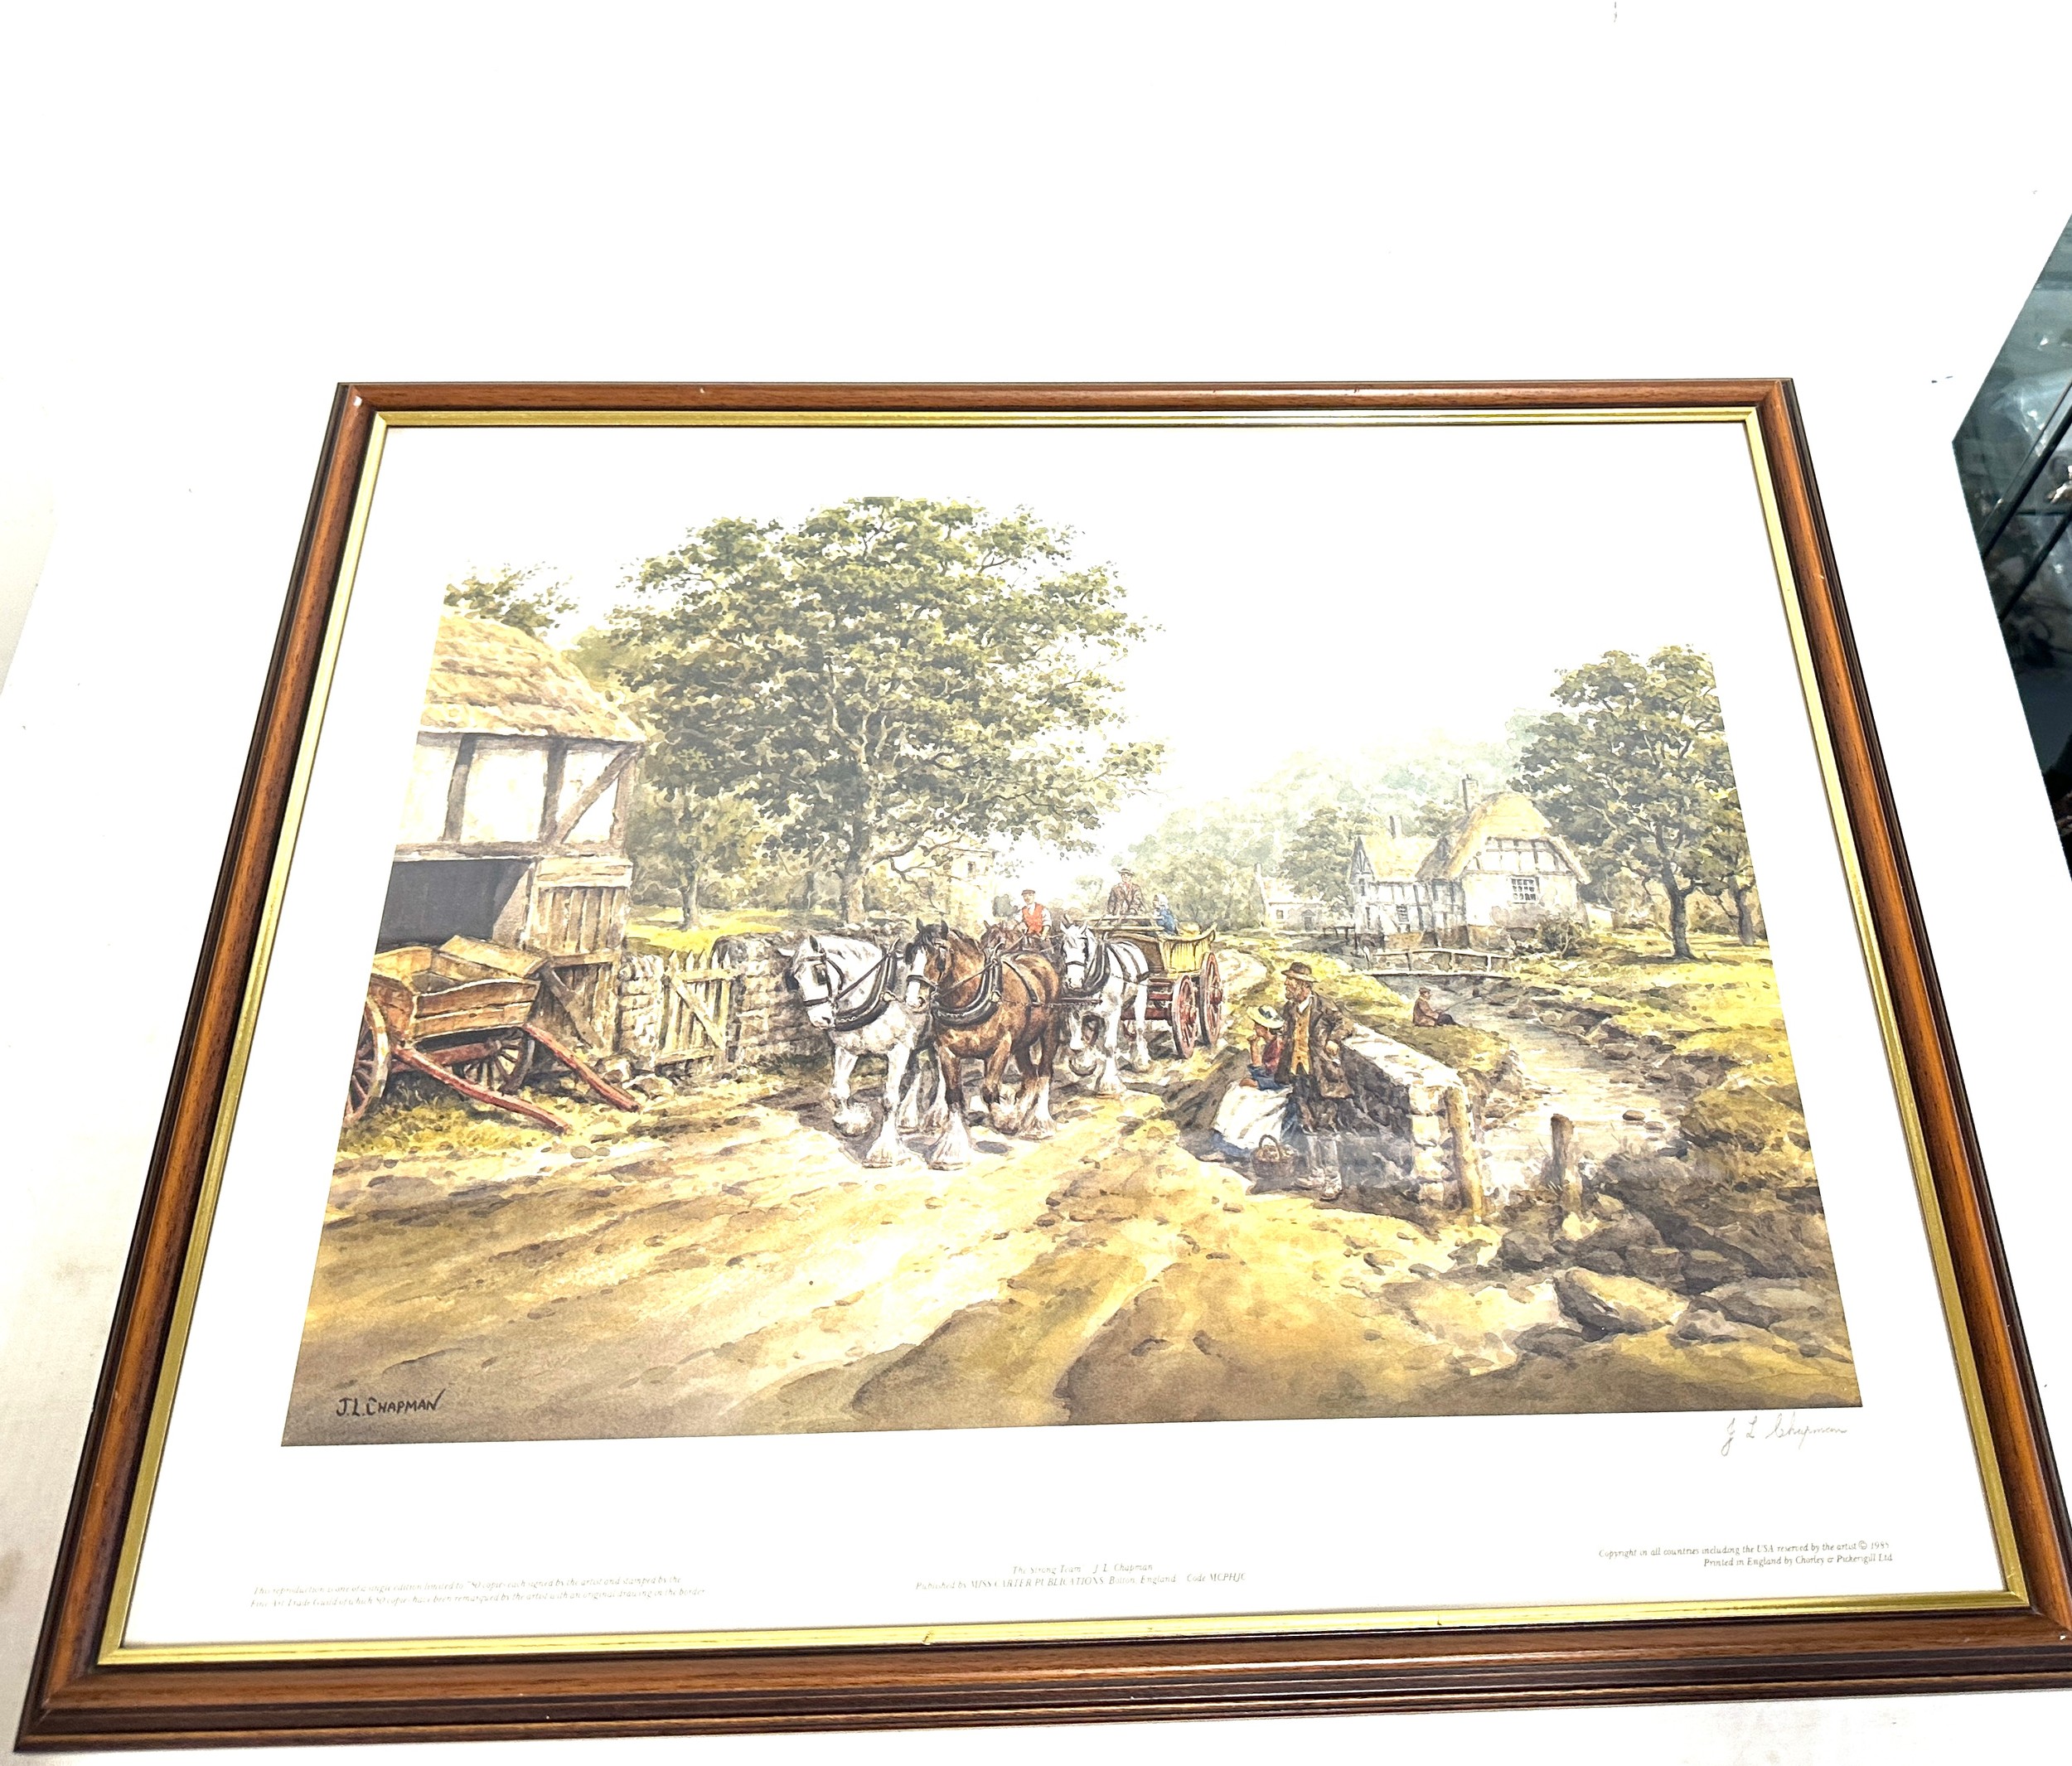 Framed print "the strong team" by J.L.Chapman framed measures approximately 23 inches wide by 19 - Image 2 of 5